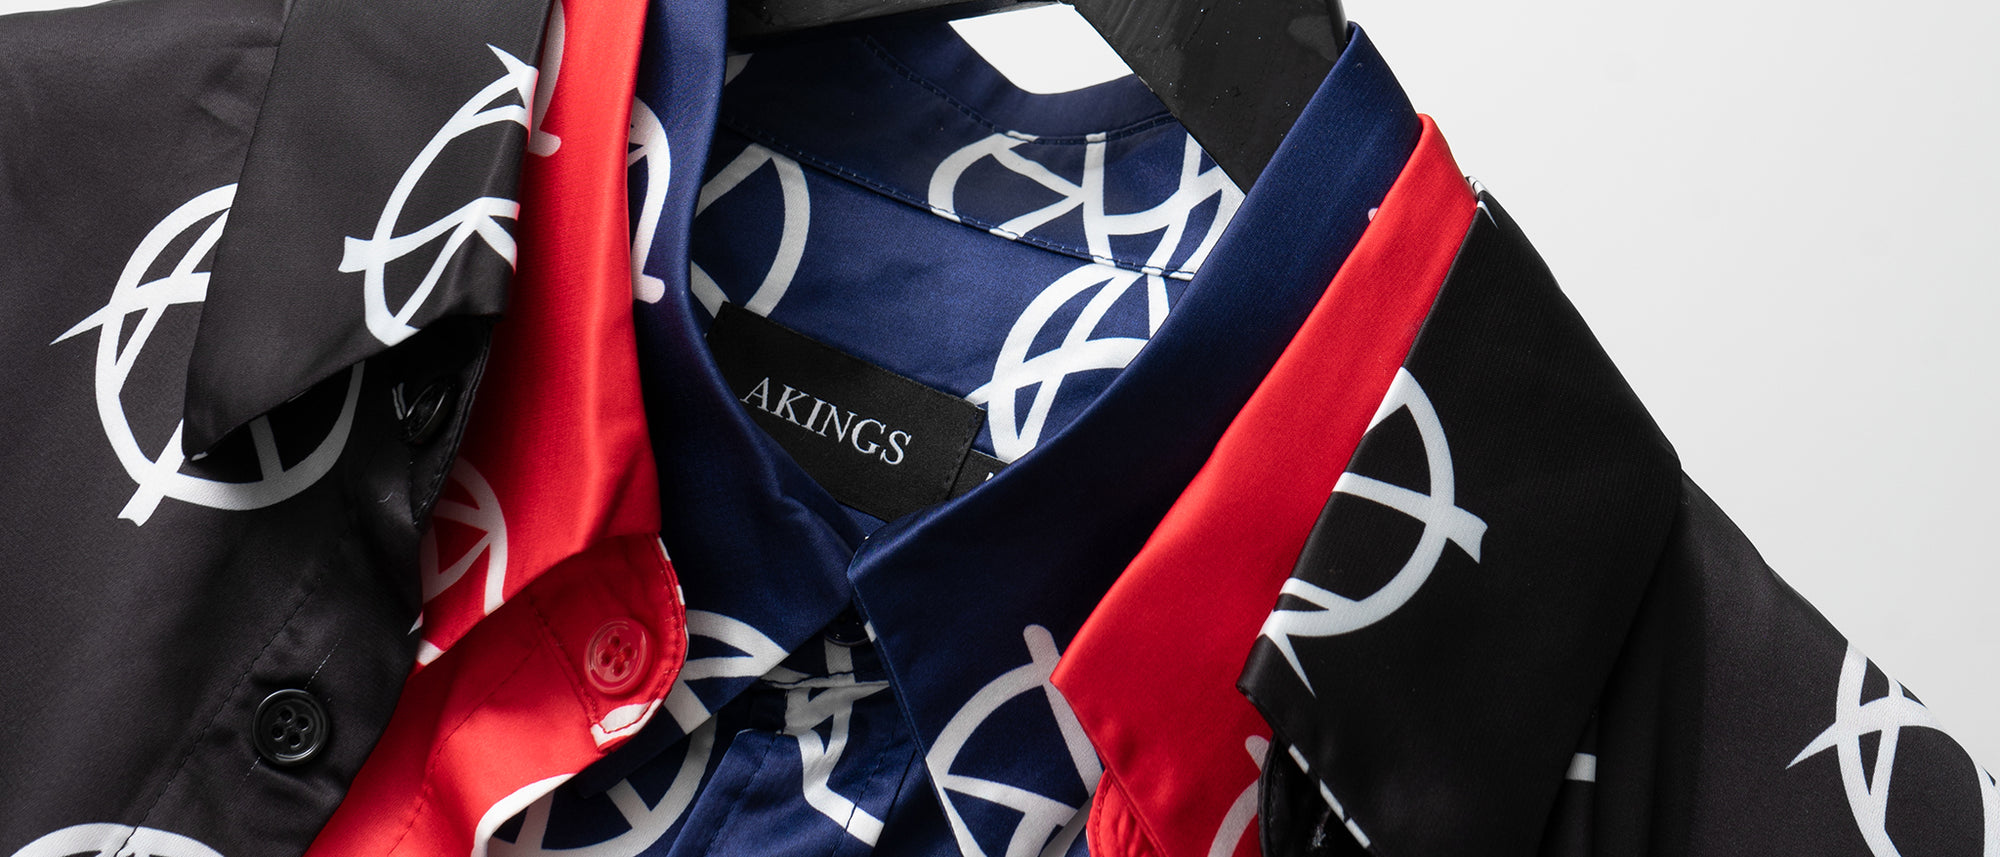 ANARCHY COLLECTION | AKINGS